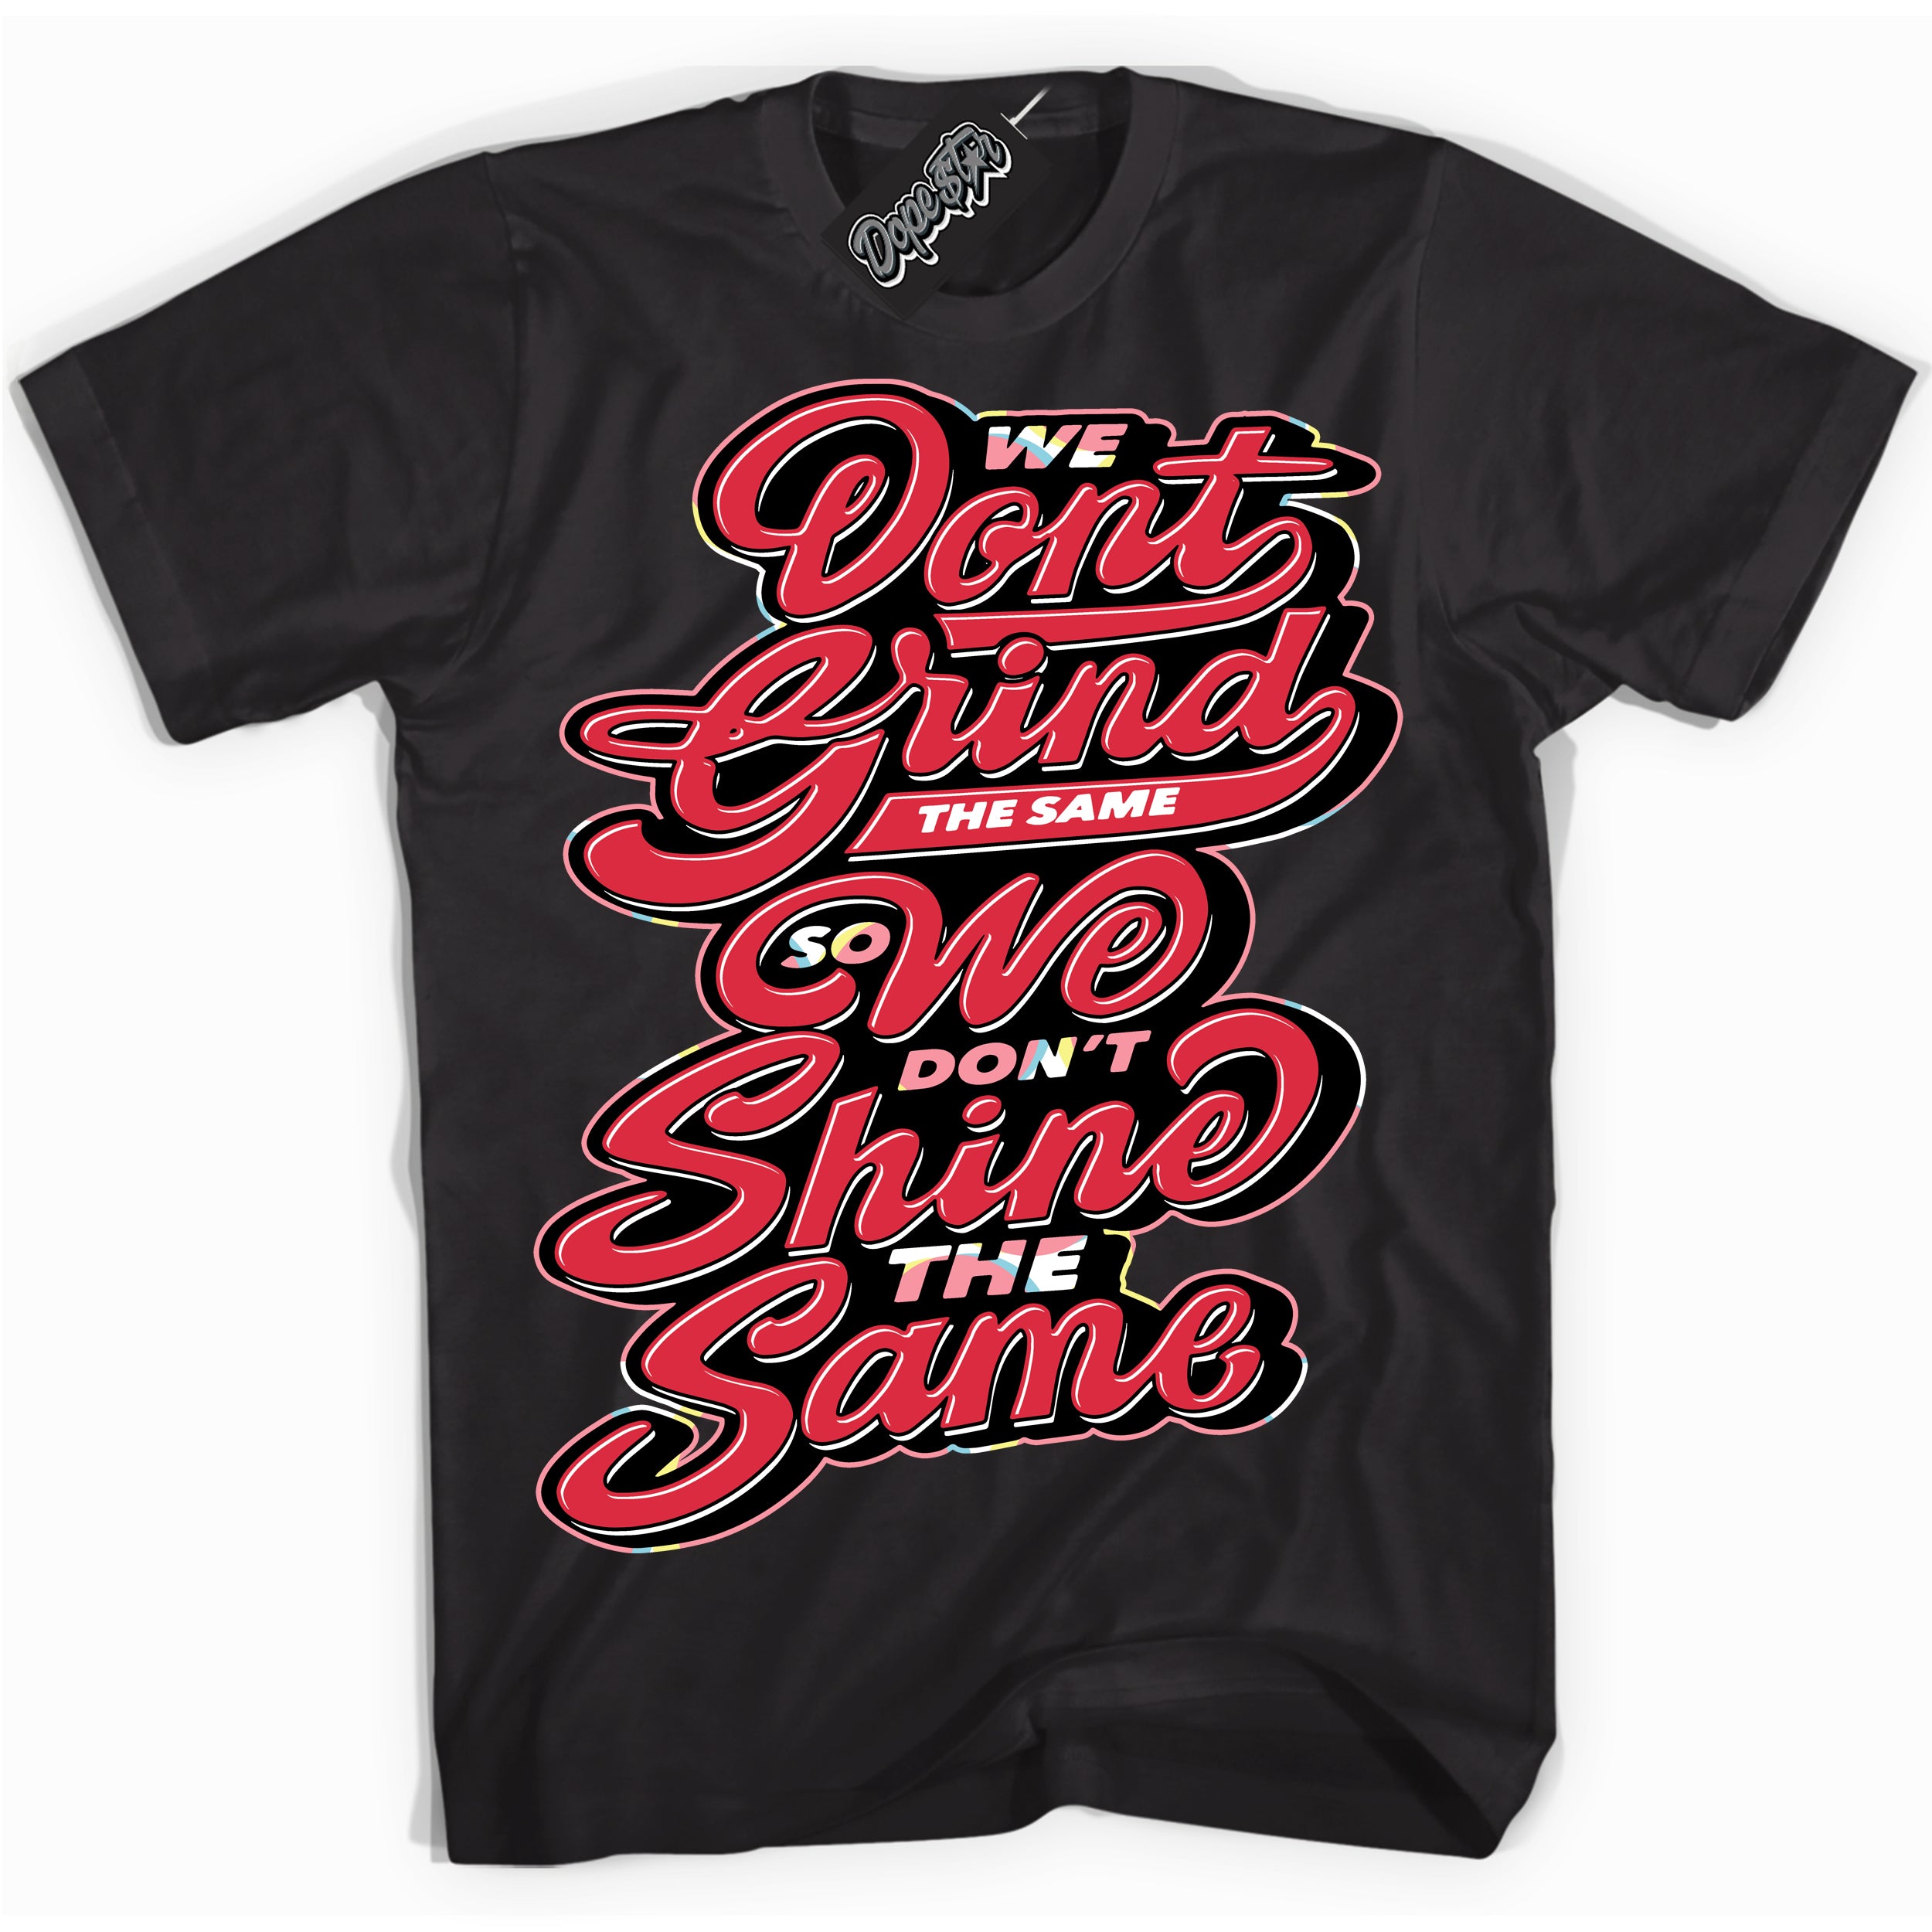 Cool Black graphic tee with “ Grind Shine ” design, that perfectly matches Spider-Verse 1s sneakers 